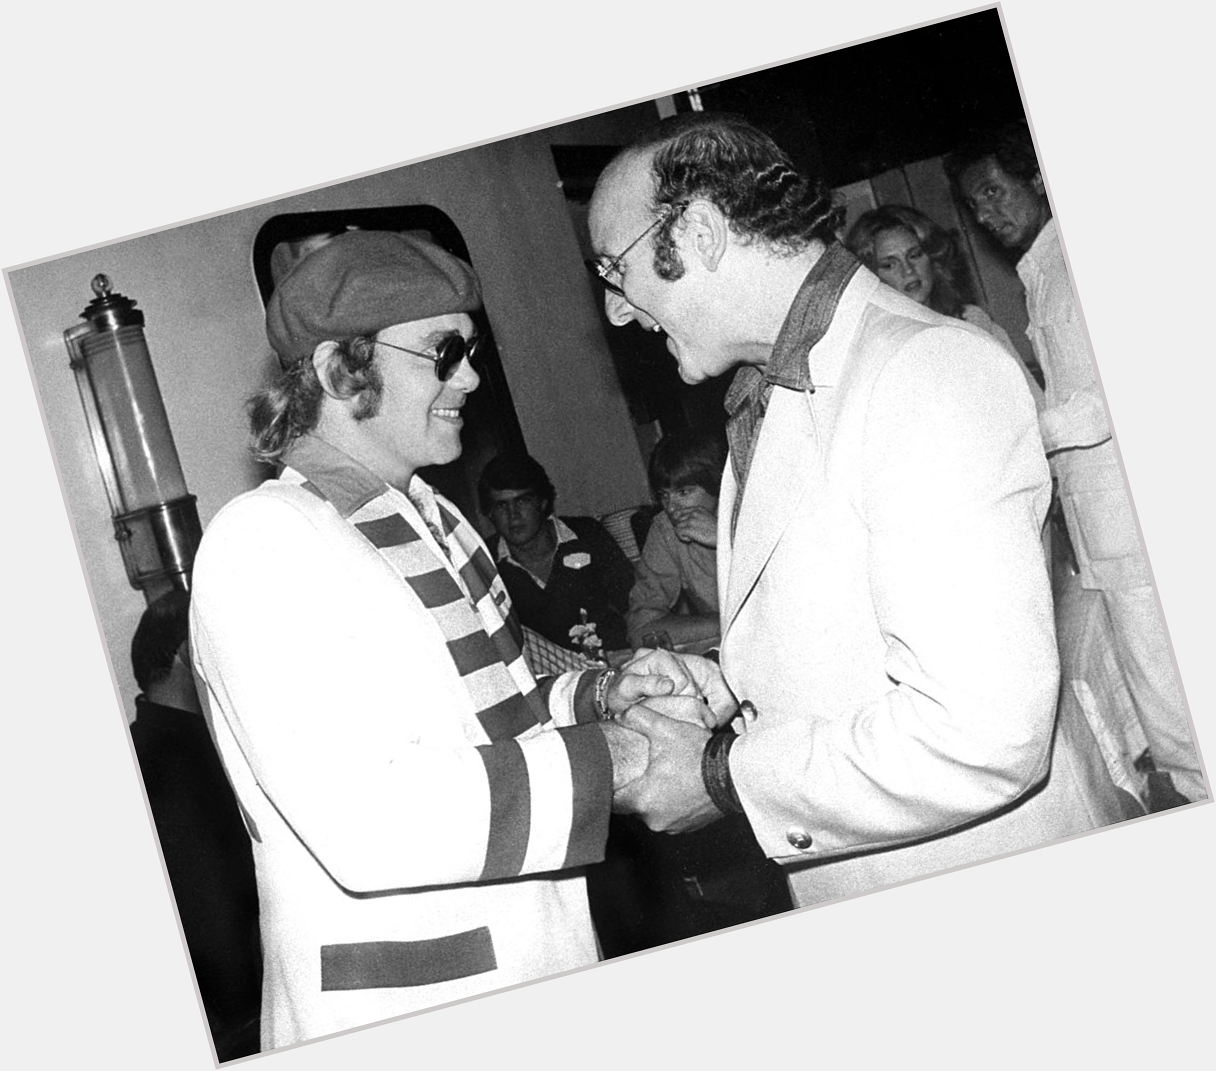 Happy Birthday to Clive Davis who turns 89 years young today - pictured here with Elton John, NYC, 1979 